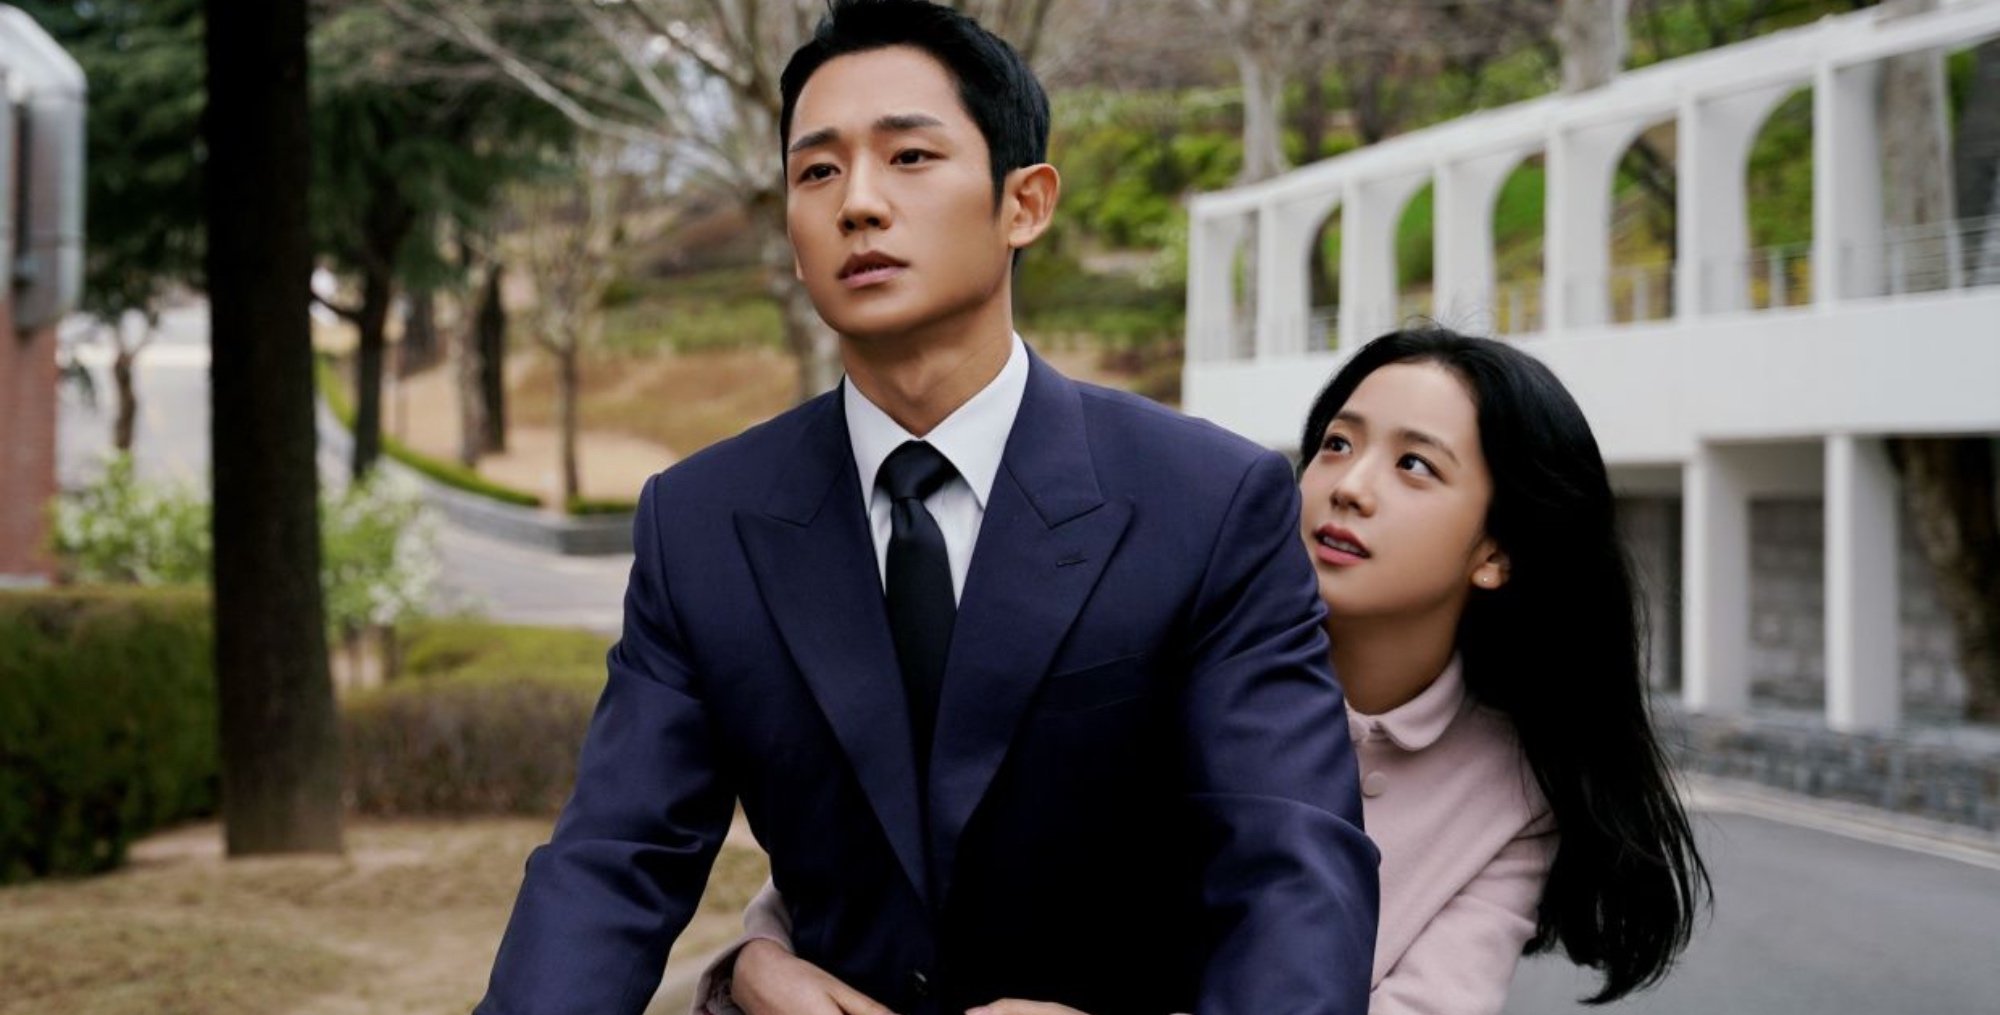 Actors Jung Hae-in and Jisoo in 'Snowdrop' K-drama and controversy